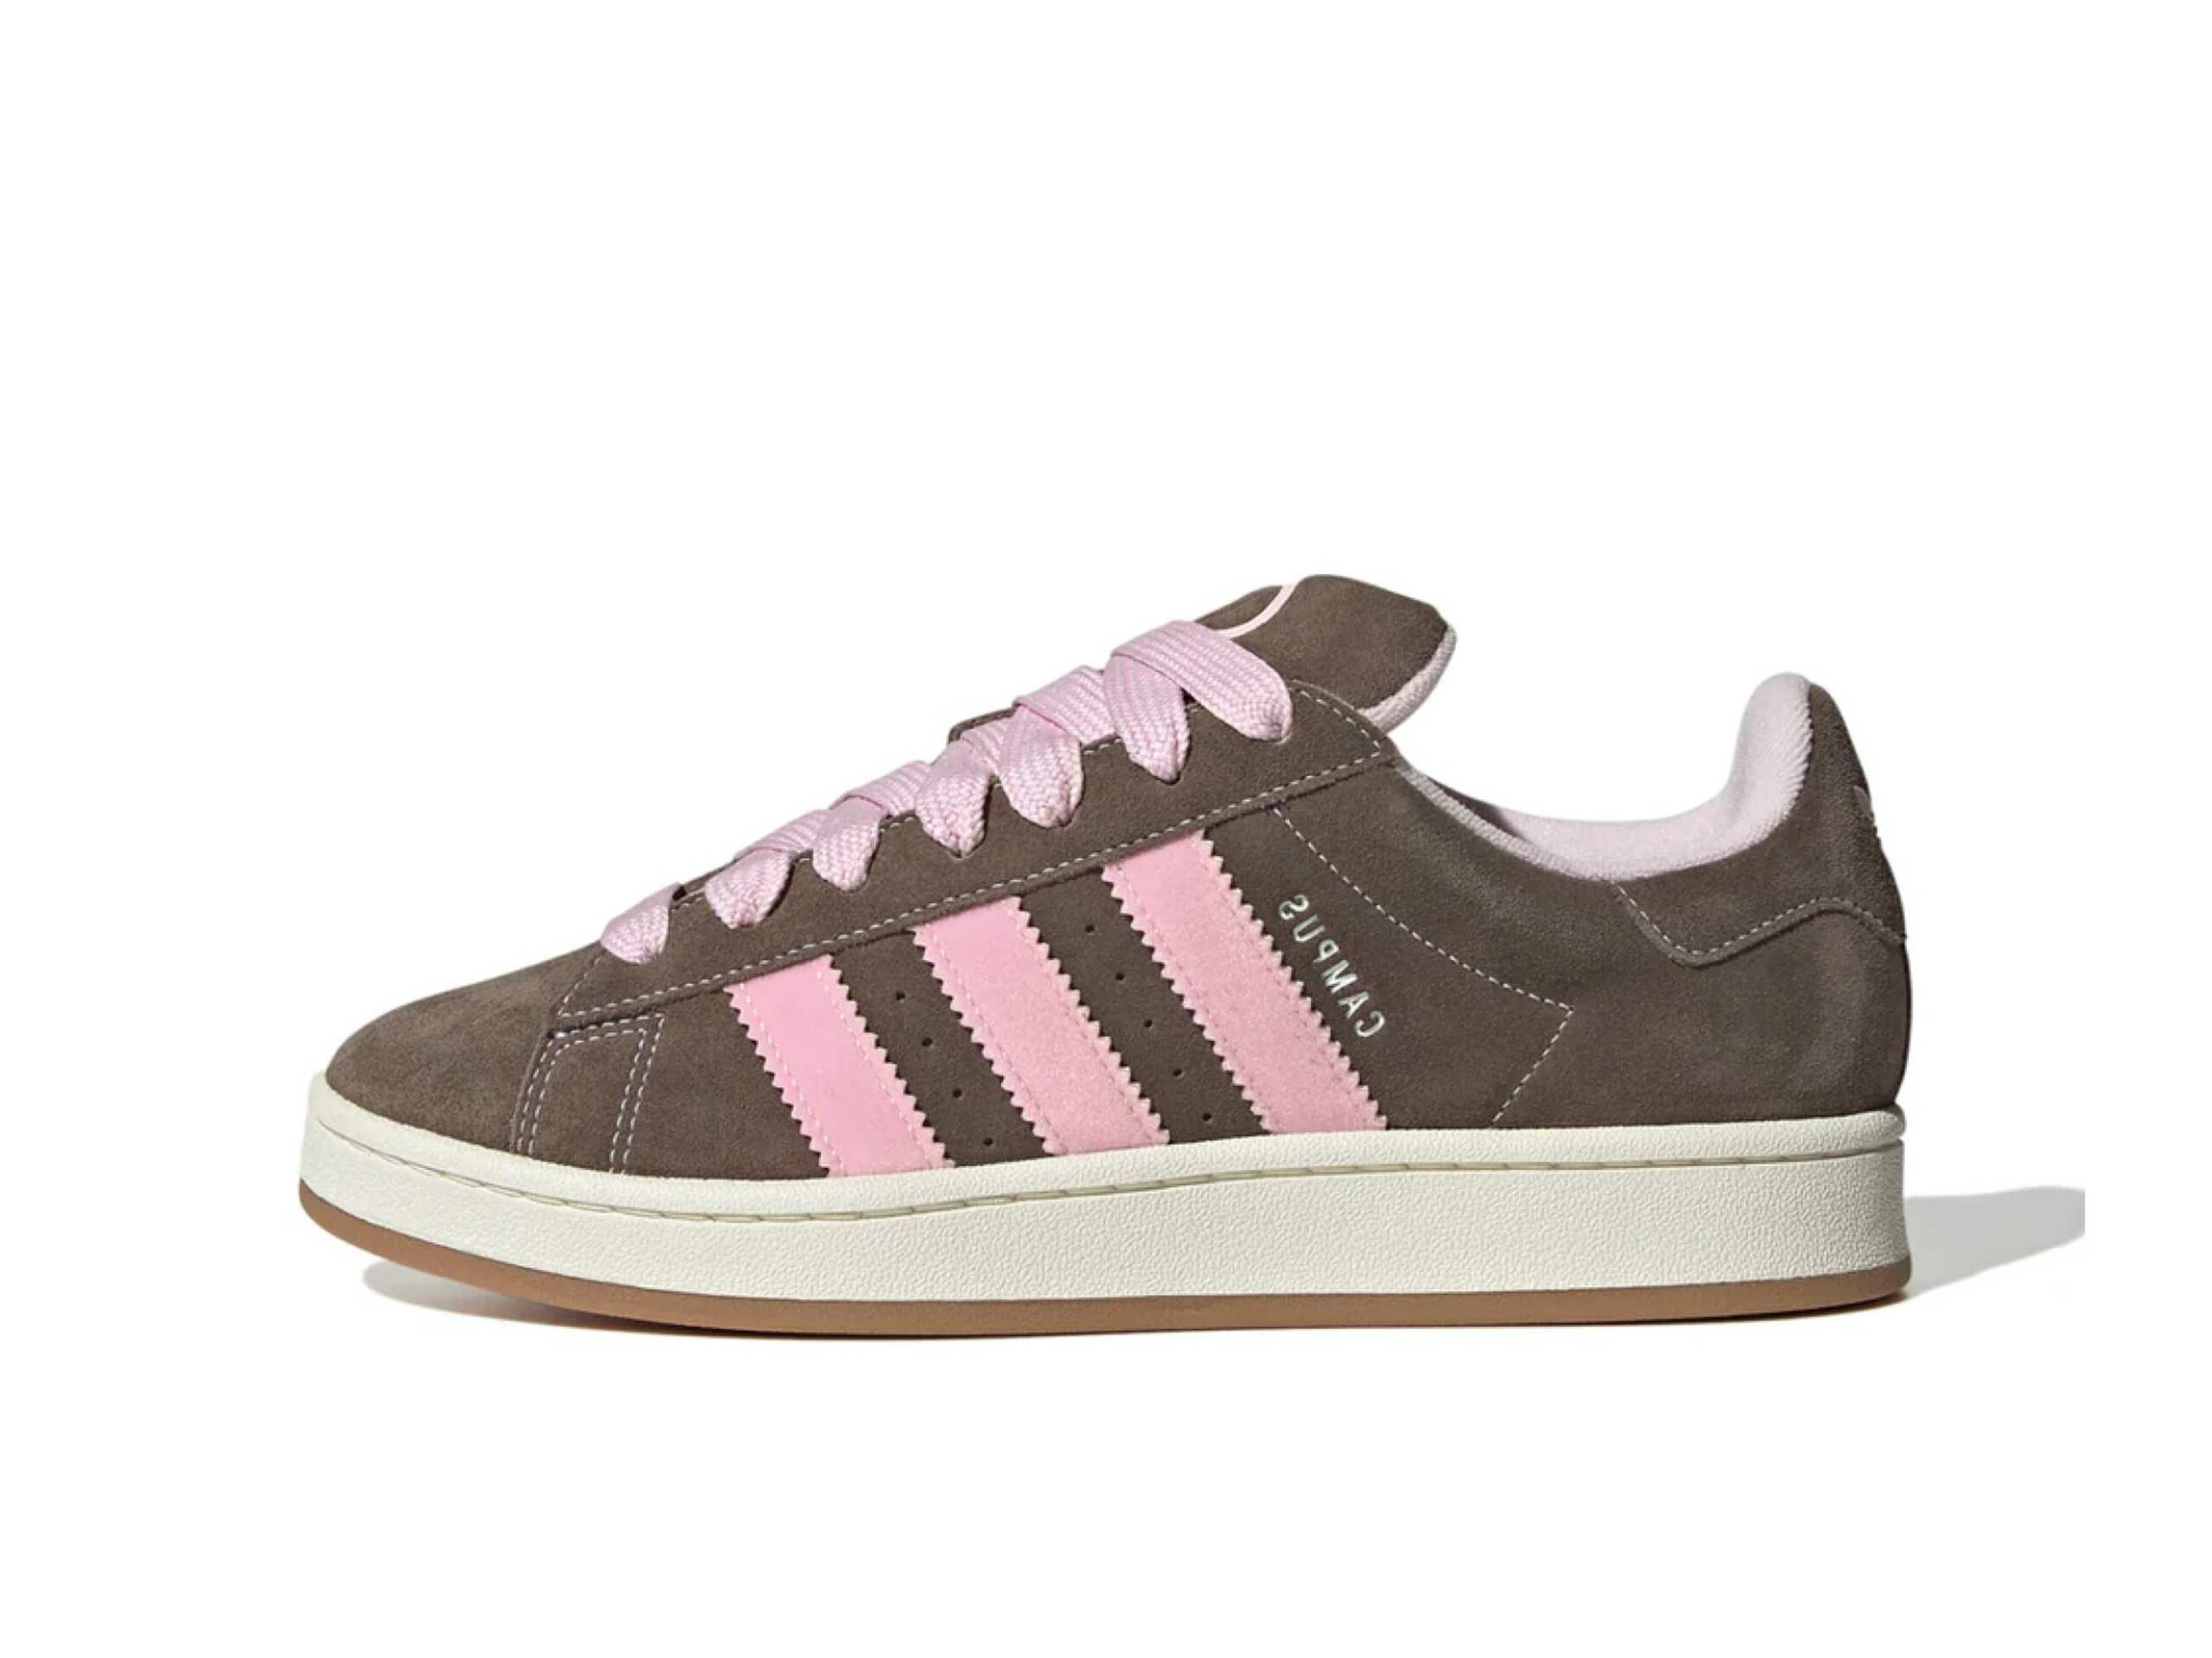 Адидас 00. Adidas Campus 00s Brown and Pink. Кроссовки Campus 00s. Adidas Campus 00s. Кроссовки адидас кампус 00s.